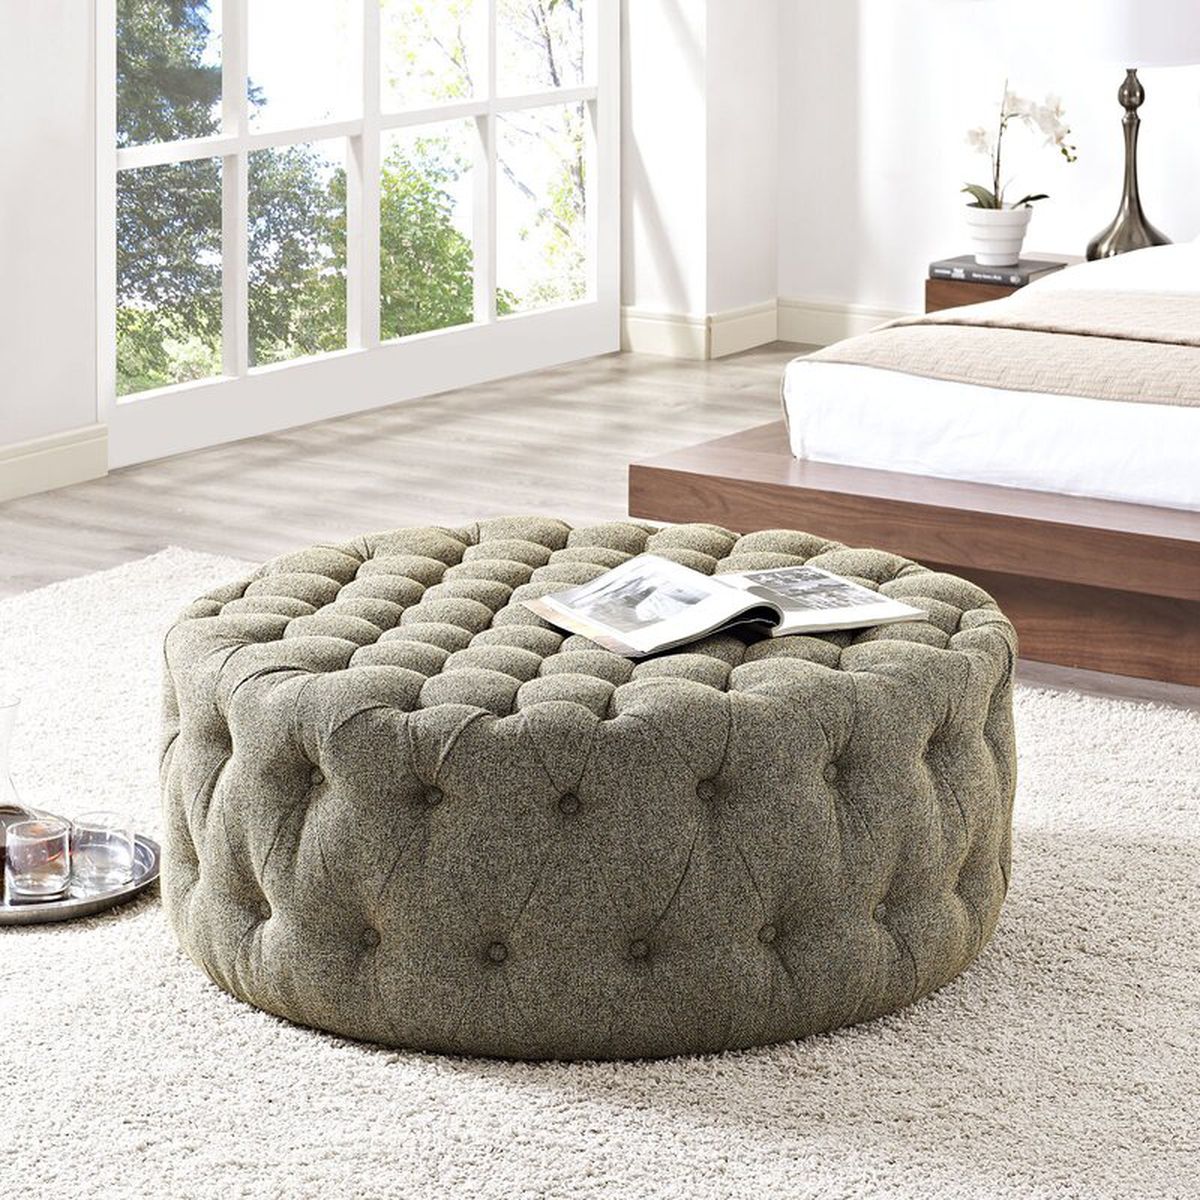 Gray round tufted ottoman in a bedroom.